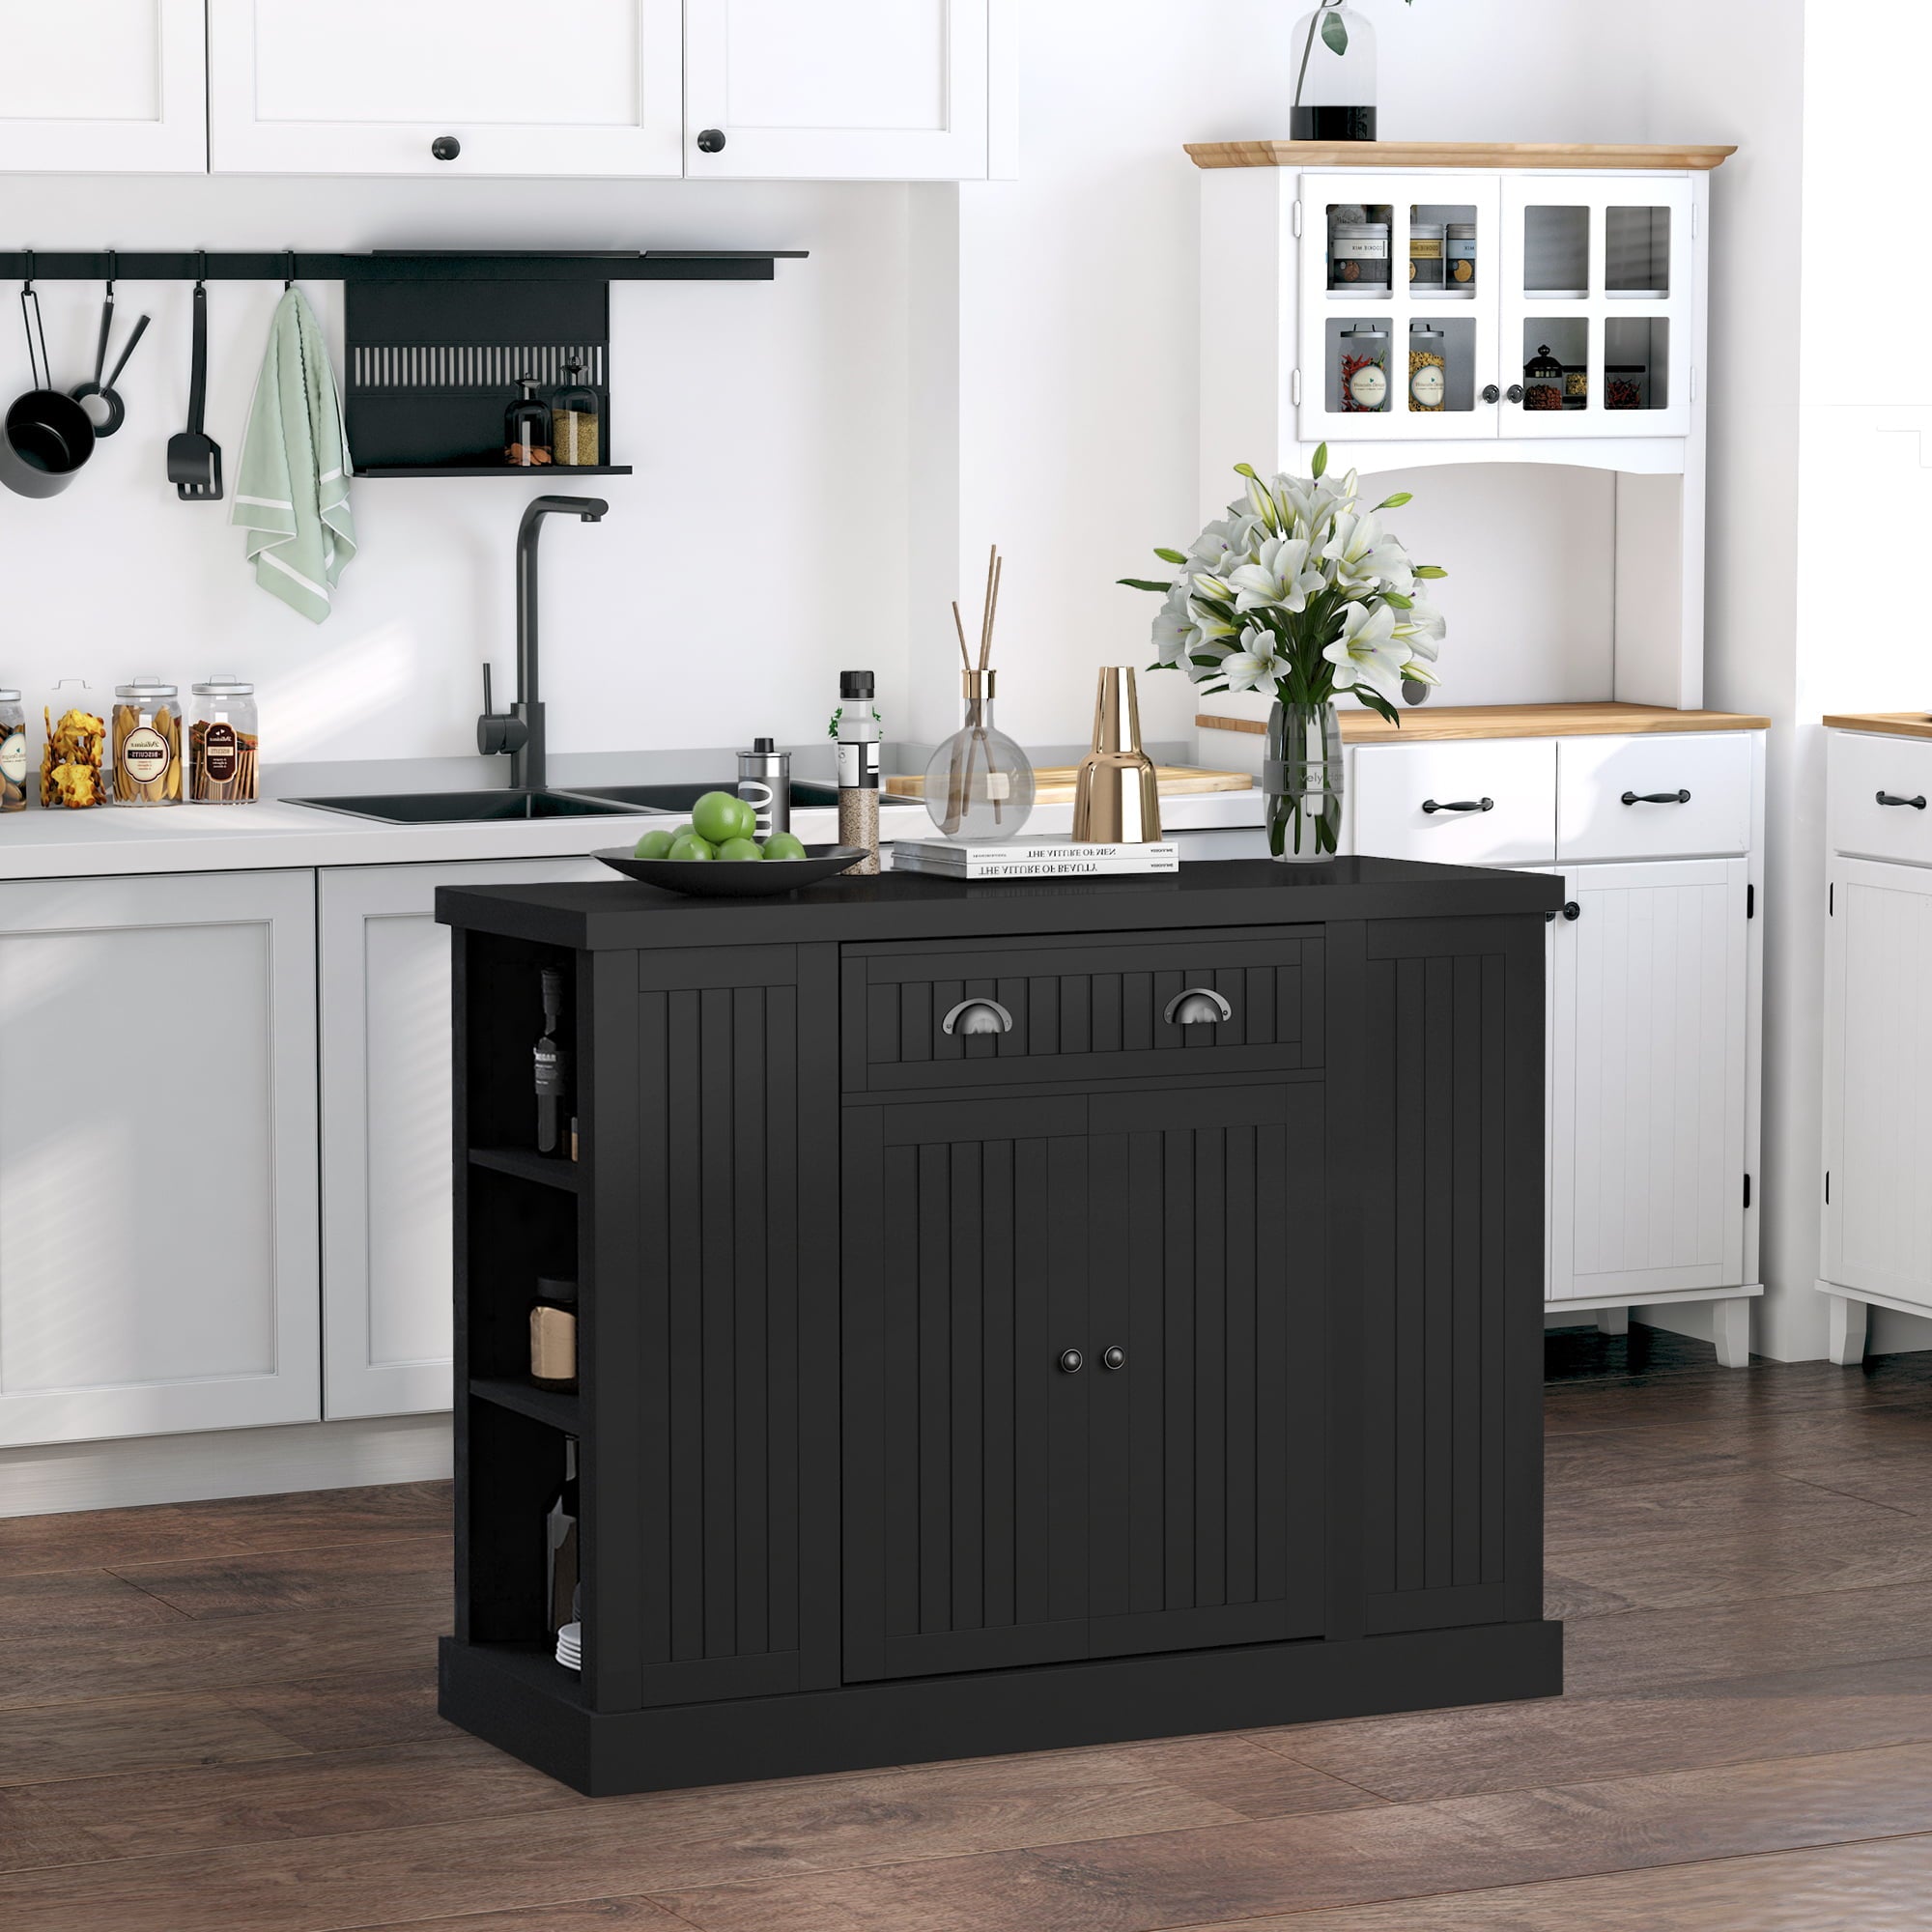 HomCom Fluted-Style Wooden Kitchen Island Storage Cabinet with Drawer， Open Shelving， and Interior Shelving for Dining Room， Black